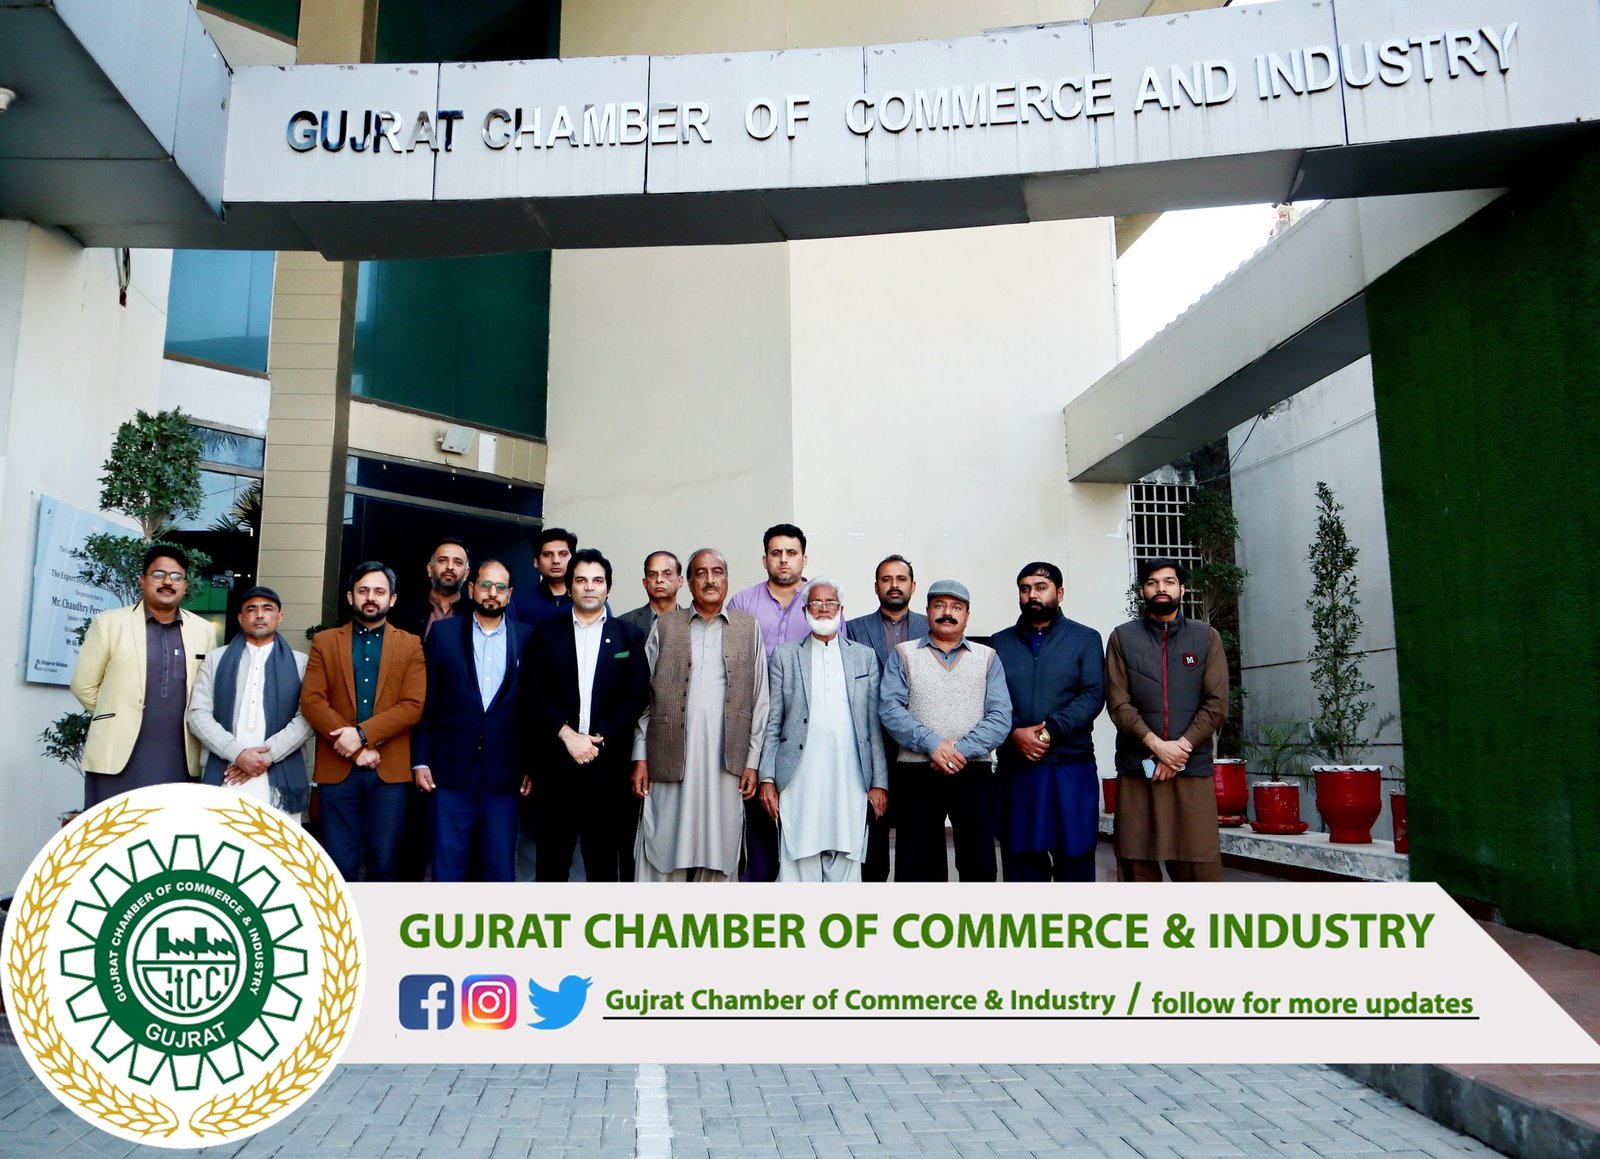 Mr. Abdur Rehman Dogar #Advisor #Federal_Tax_Ombudsman #Sialkot visited #Gujrat_Chamber_of_Commerce_and_Industry. And had a meeting with members of Gujrat Chamber in the Presidency of Mr. Sikandar Ashfaq Razi #President #GtCCI.